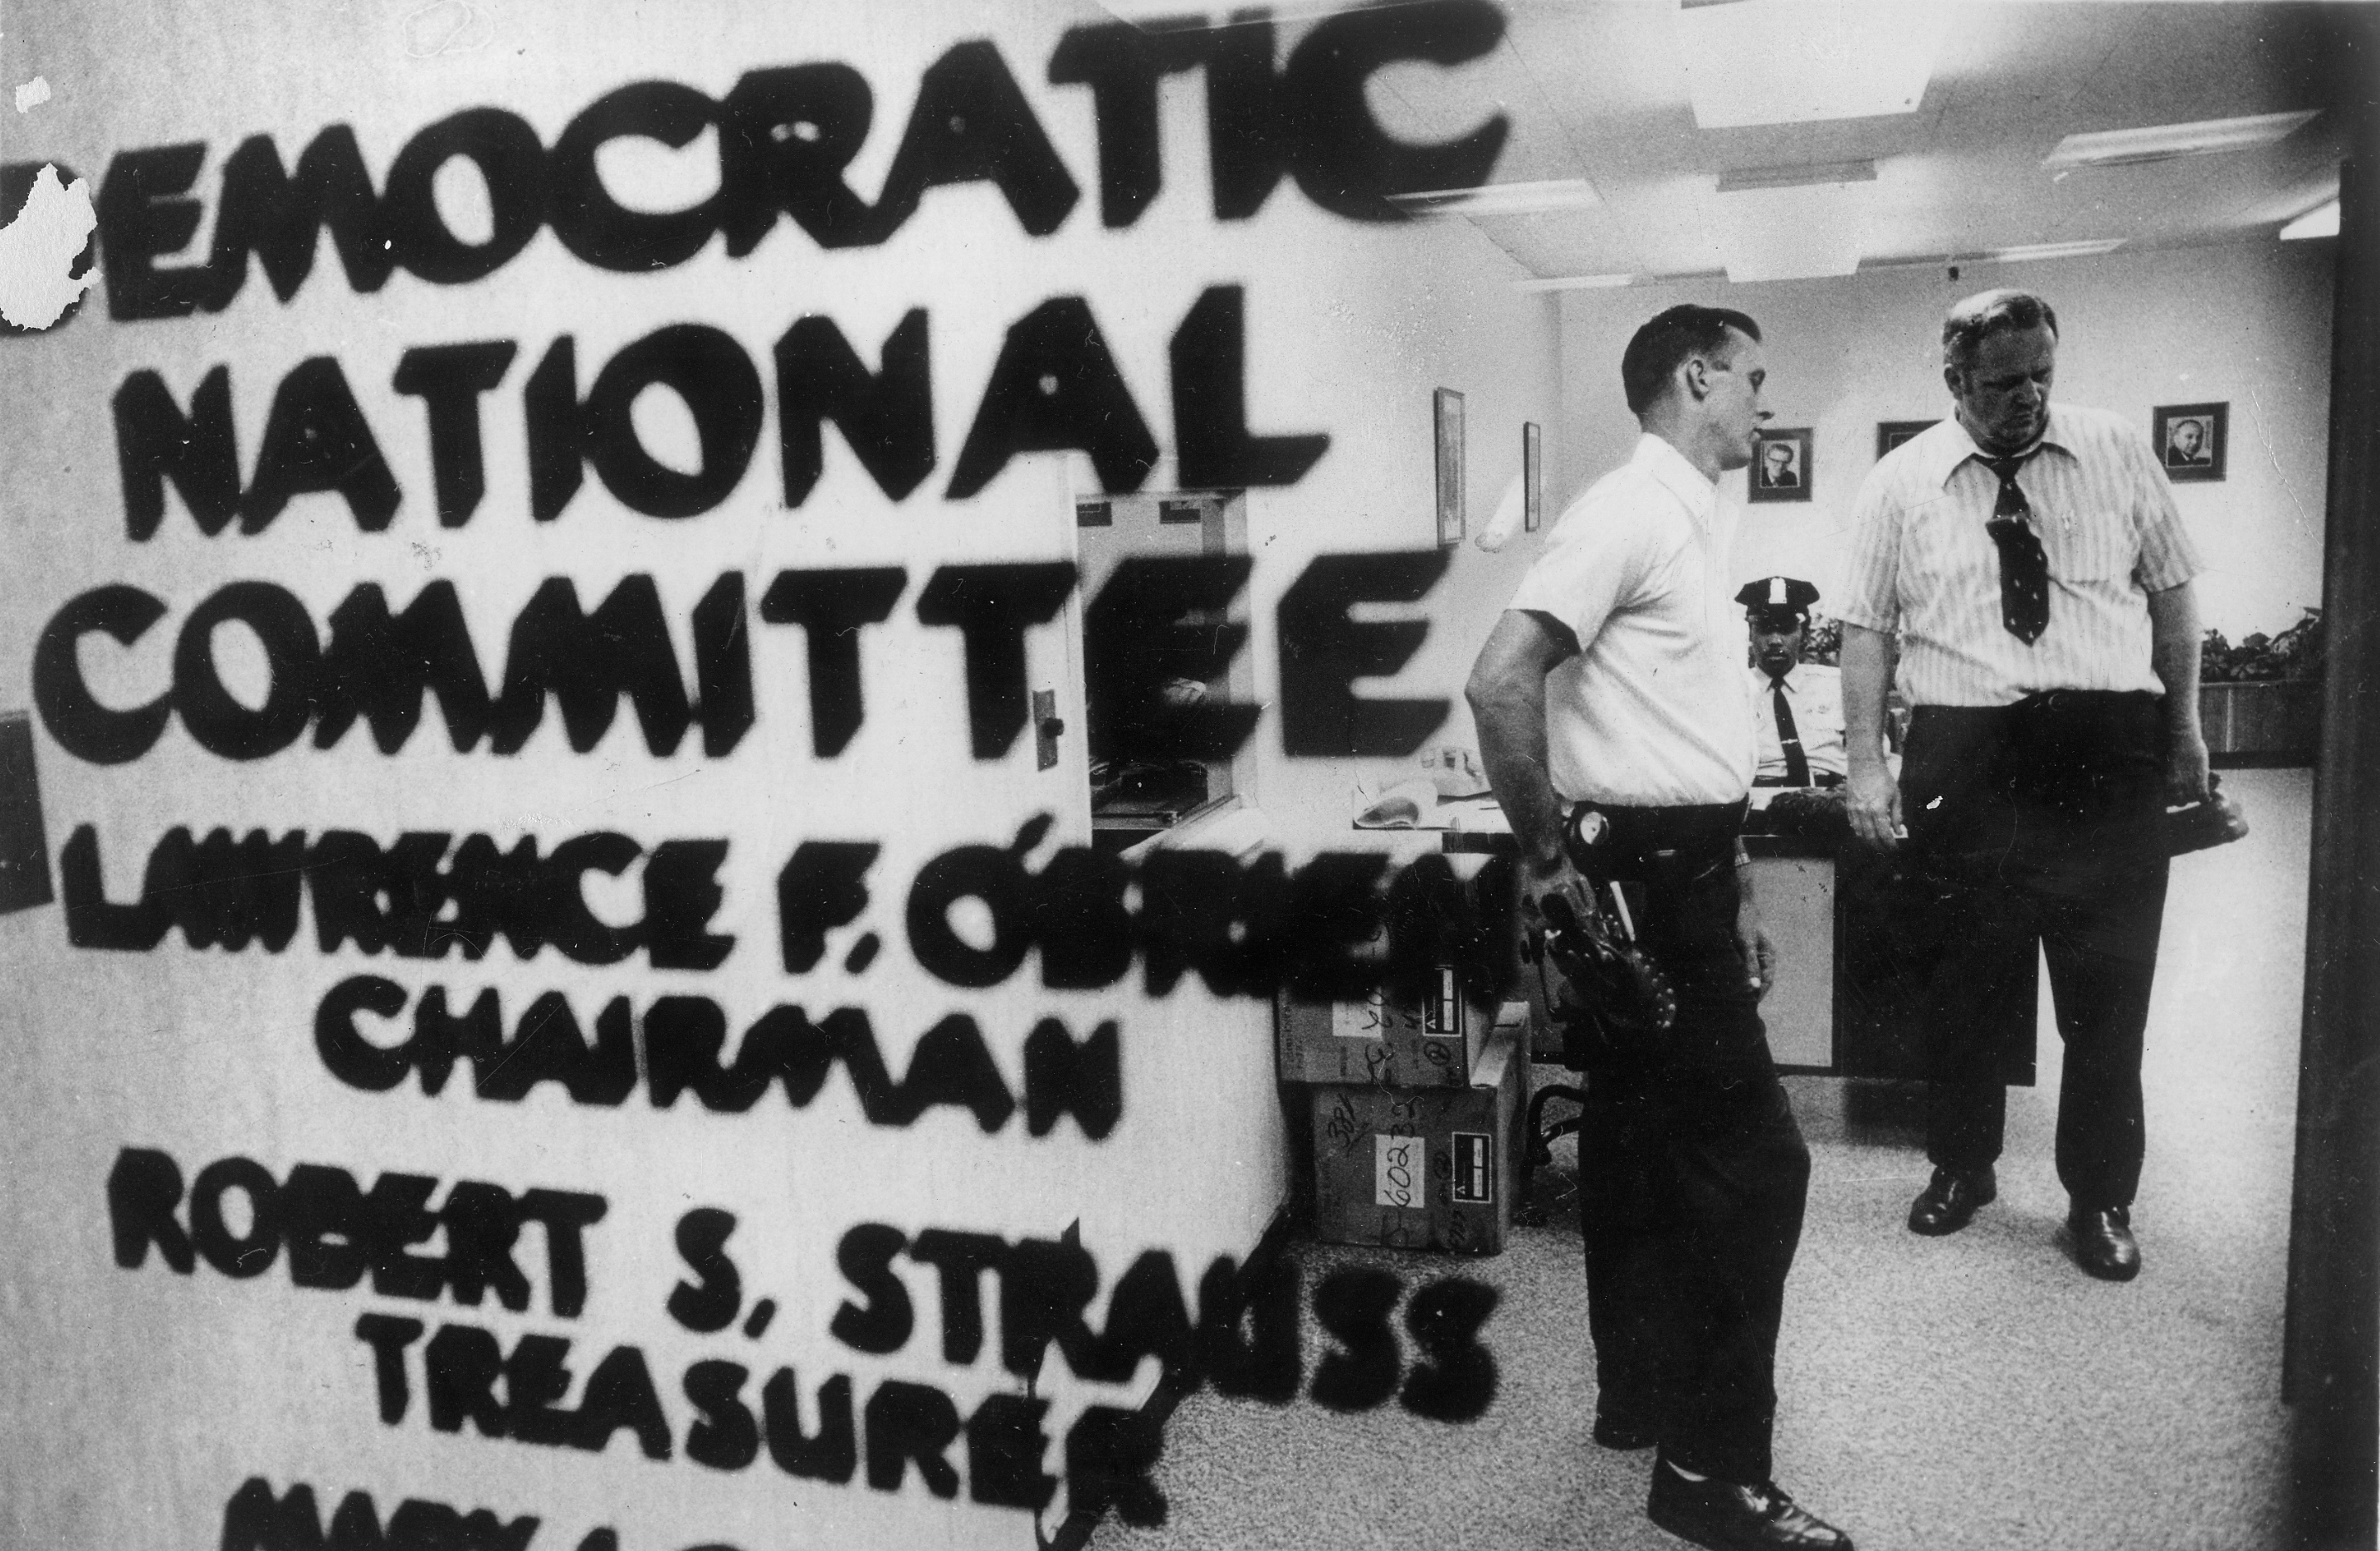 Police and telephone men check out the Democratic National Committee headquarters in Washington in June 1972 after five men were arrested during a break-in attempt. Authorities called it an elaborate plot to bug the office and said the men had photographic equipment and electronic listening devices. (Ken Feil/Washington Post)